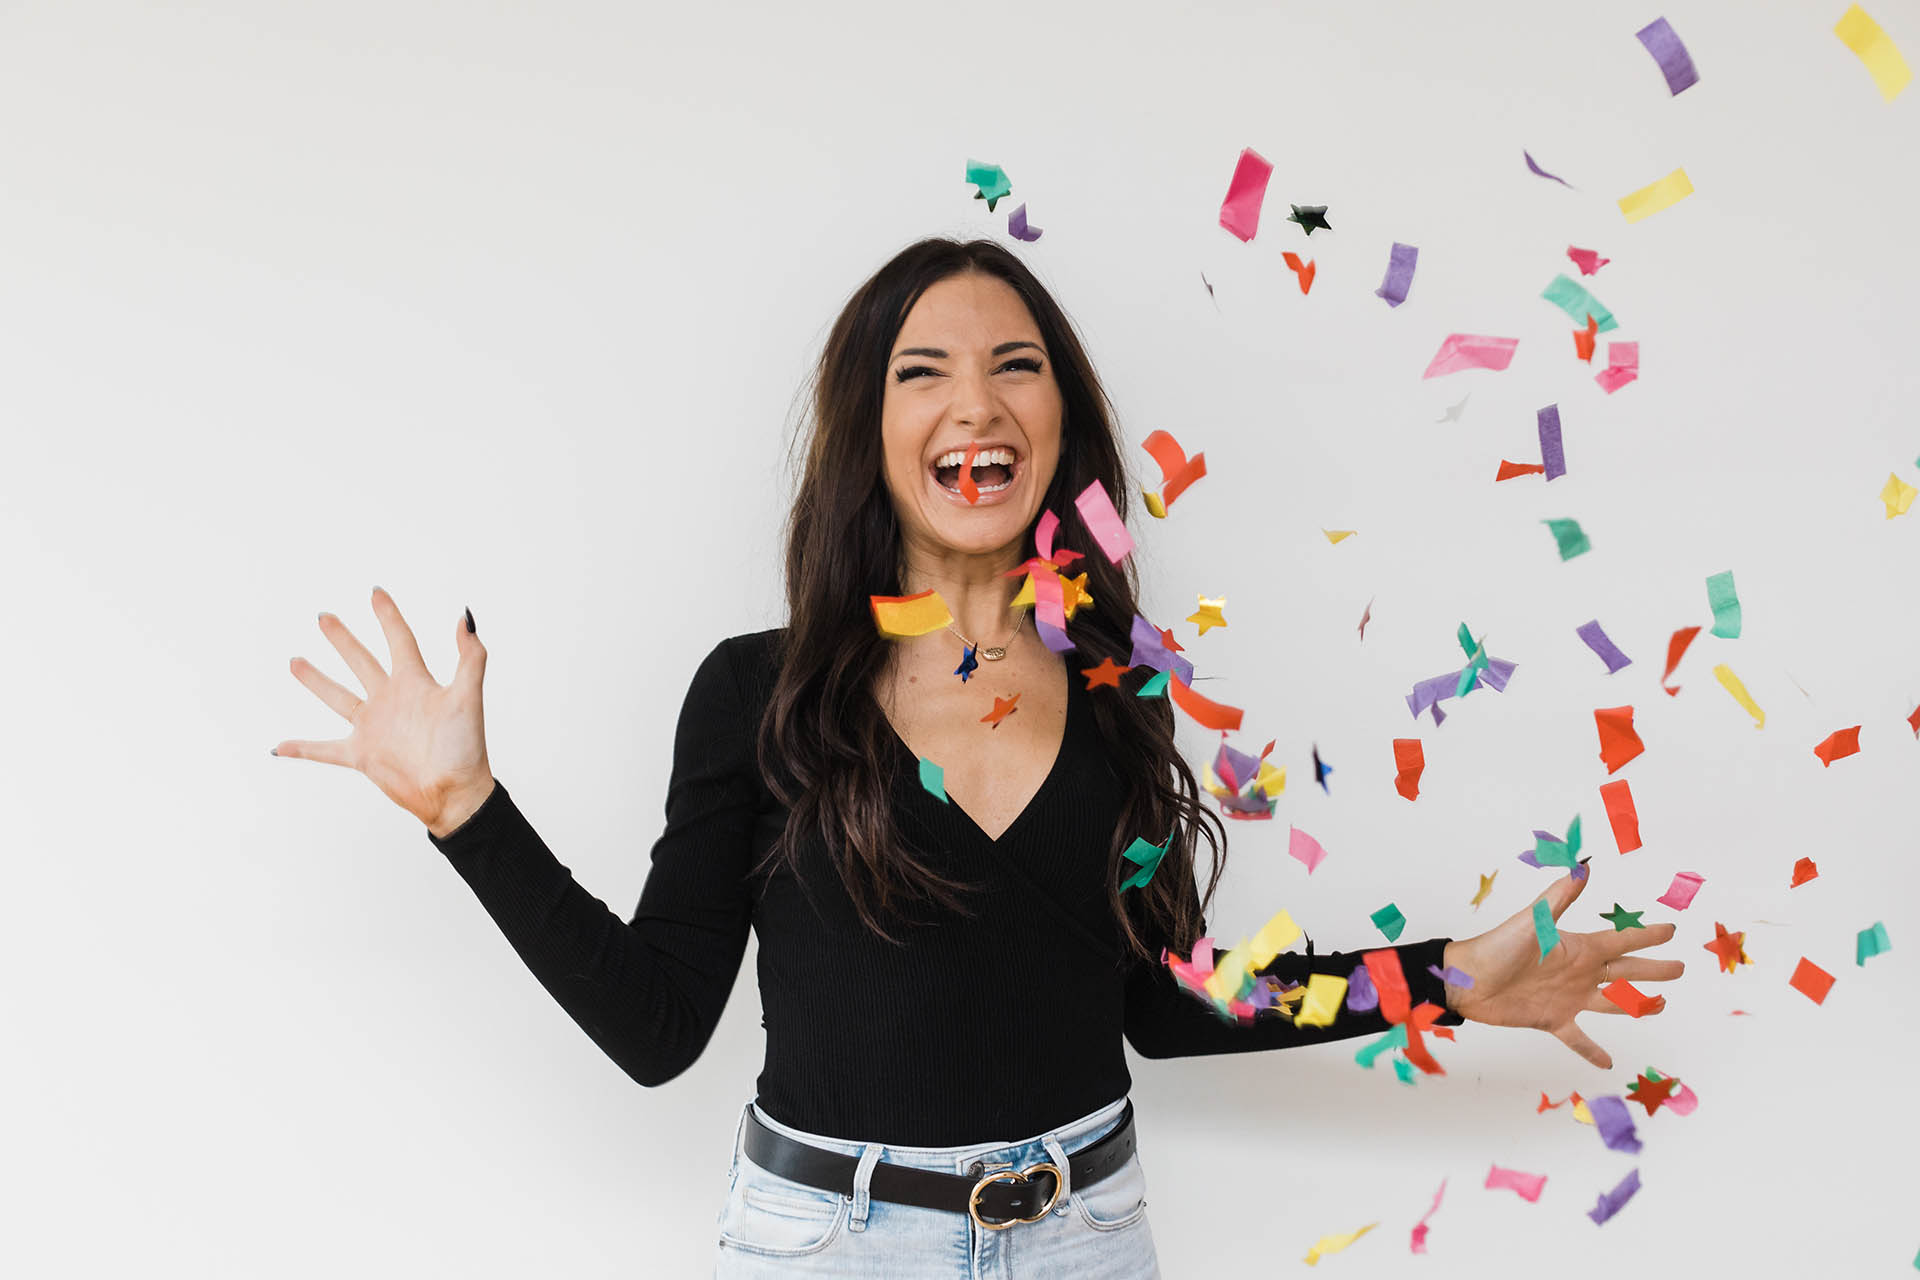 Fun corporate headshot DFW; Caucasian woman in a black shirt and jeans smiling joyously after tossing confetti into the air in front of a white backdrop